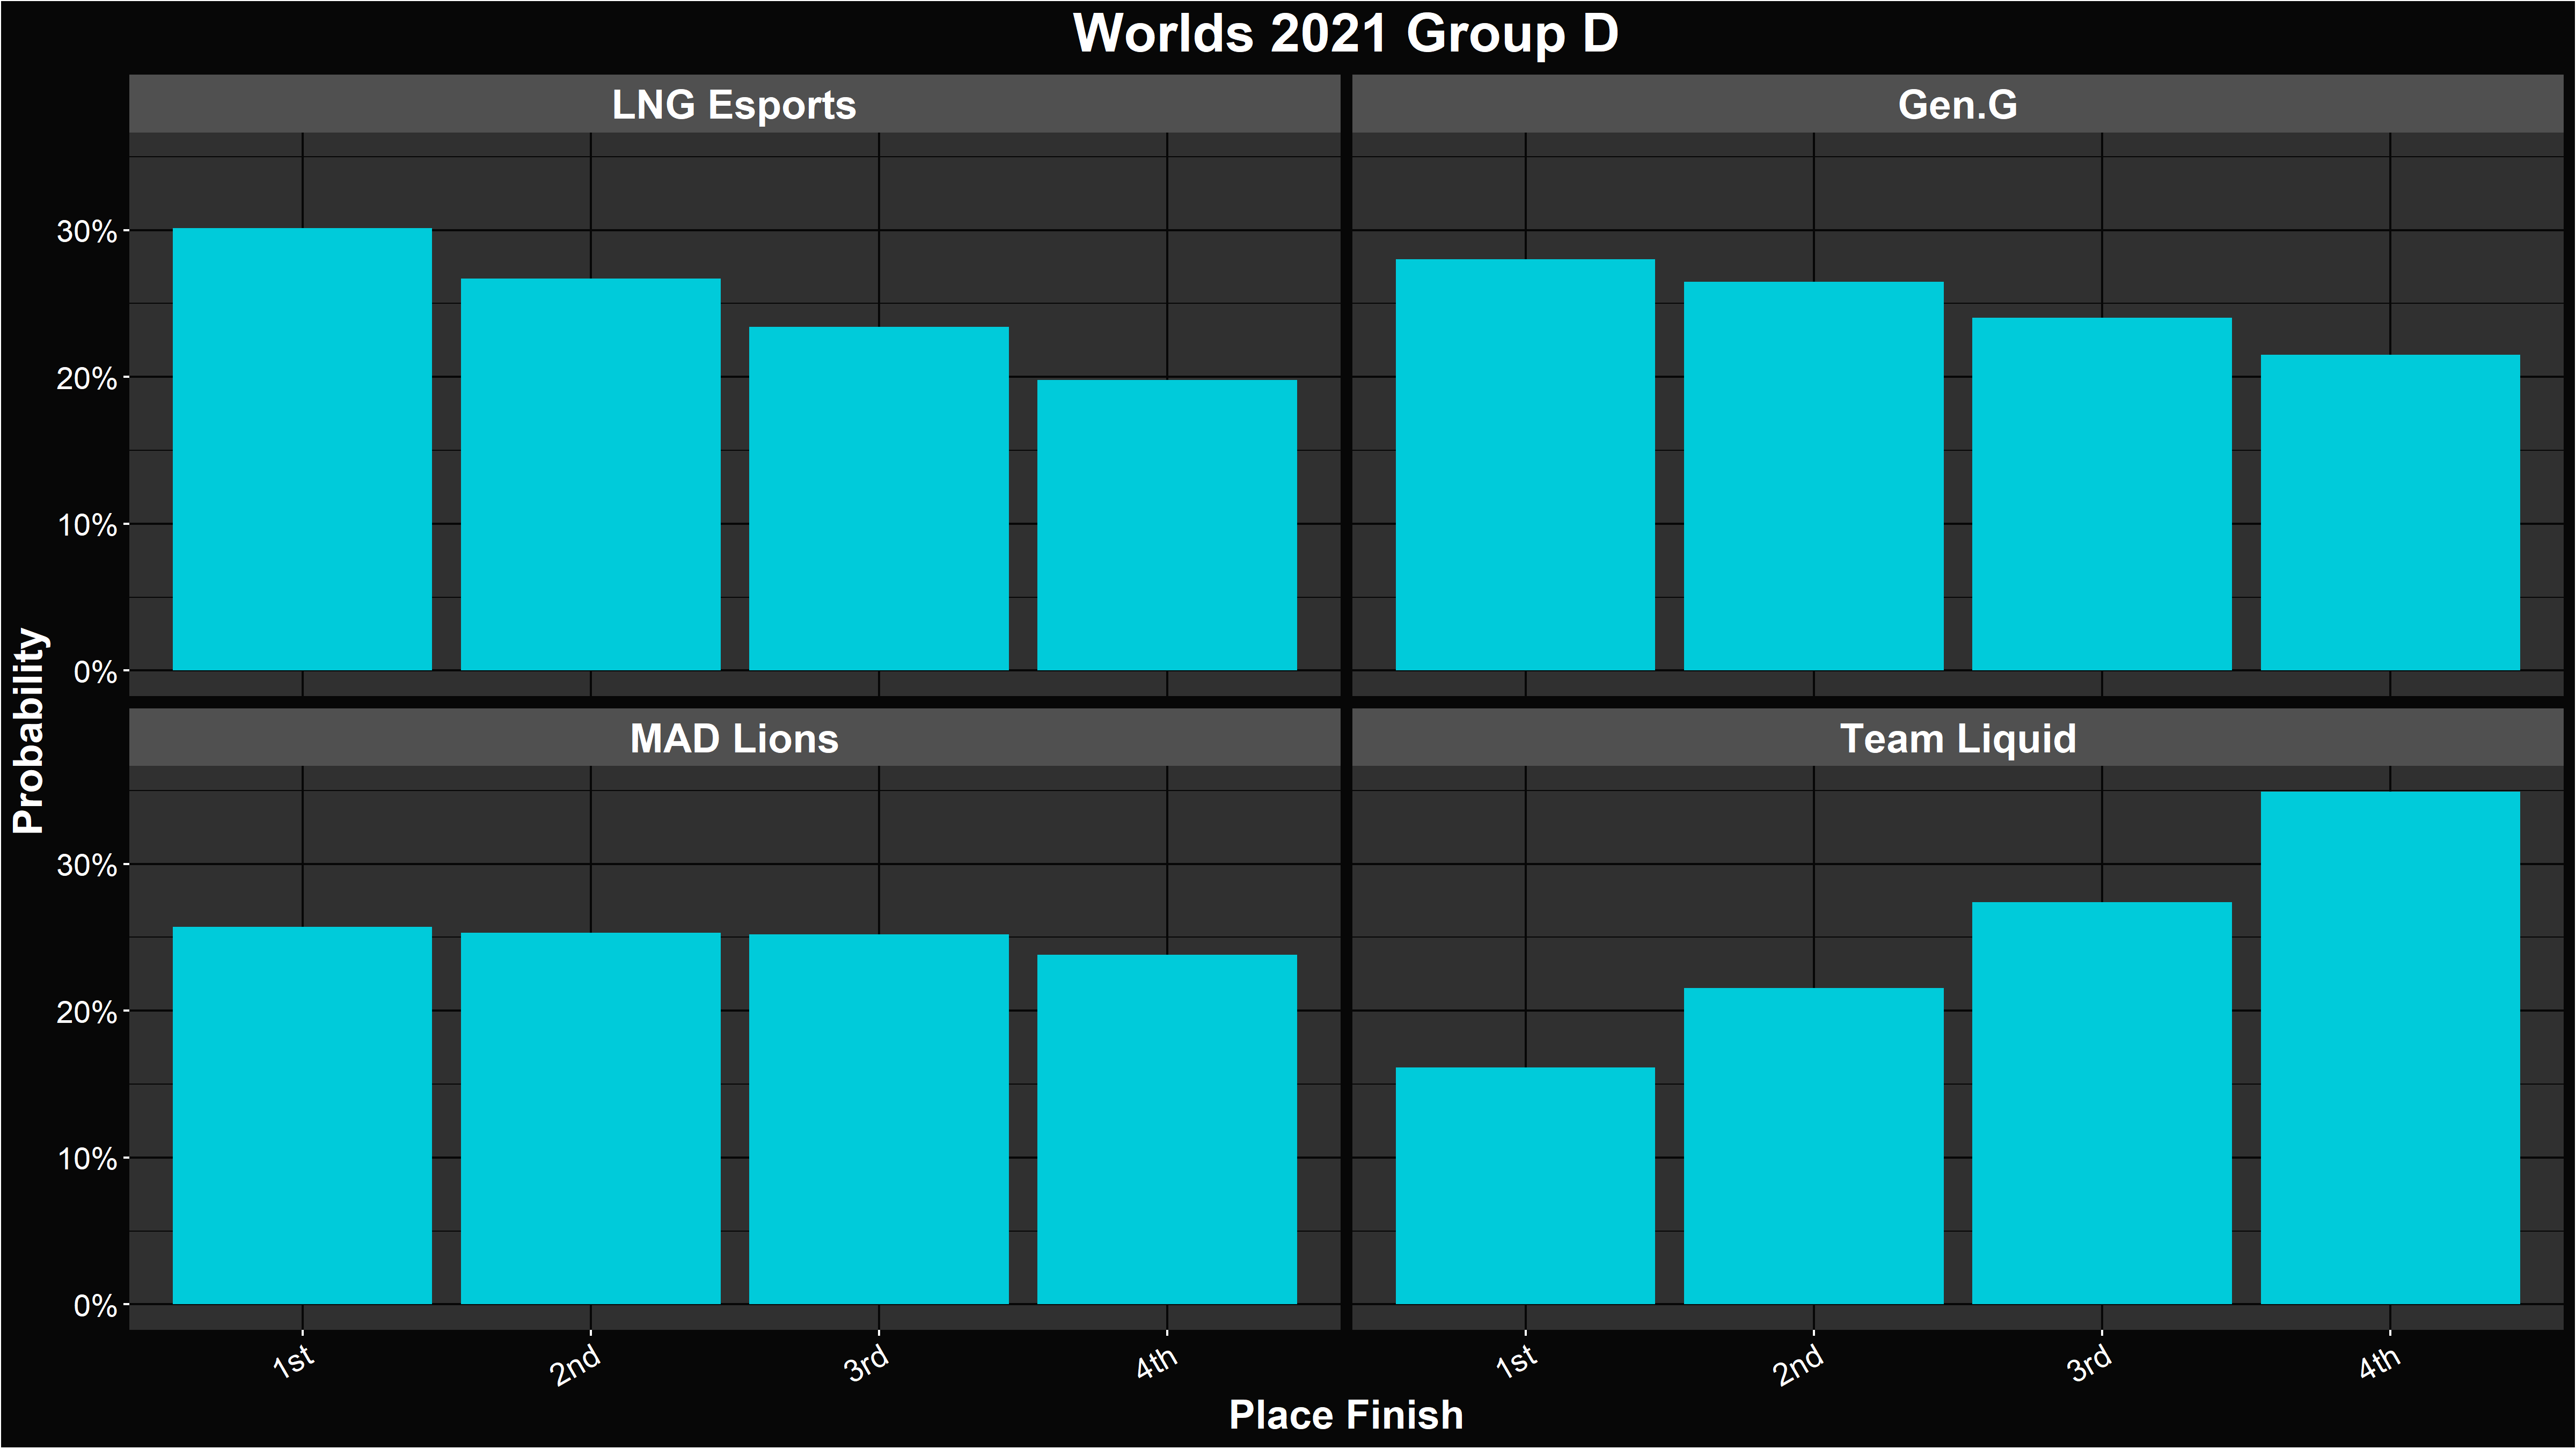 Alacrity's LoL Worlds 2021 Group D Placement Distributions